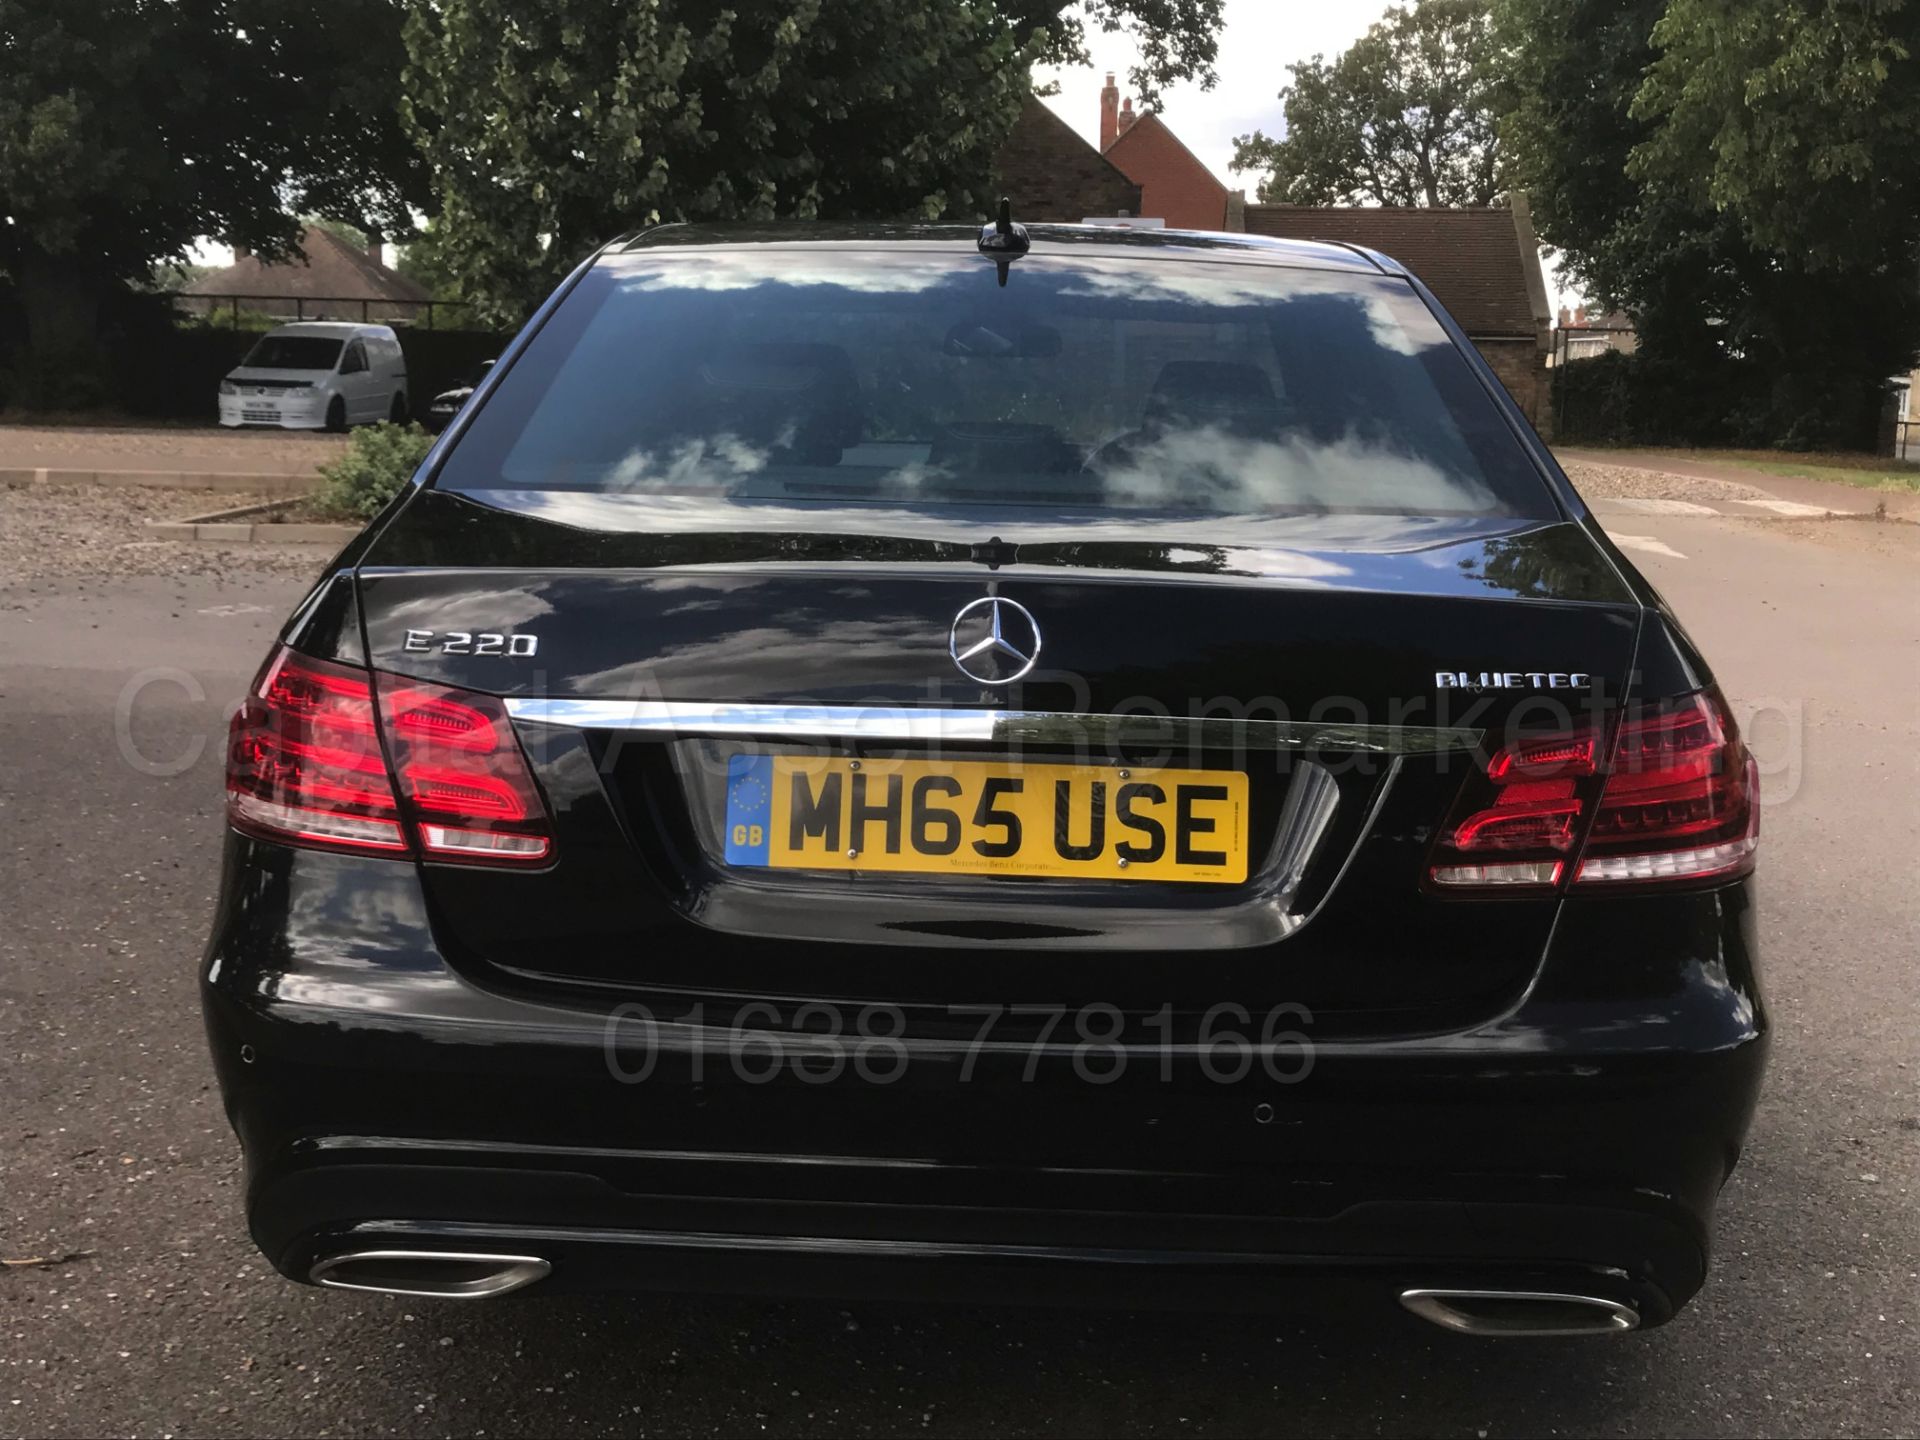 MERCEDES-BENZ E220D *AMG - NIGHT EDITION* SALOON (2016) '7G AUTO - LEATHER - SAT NAV' *LOW MILES* - Image 6 of 43